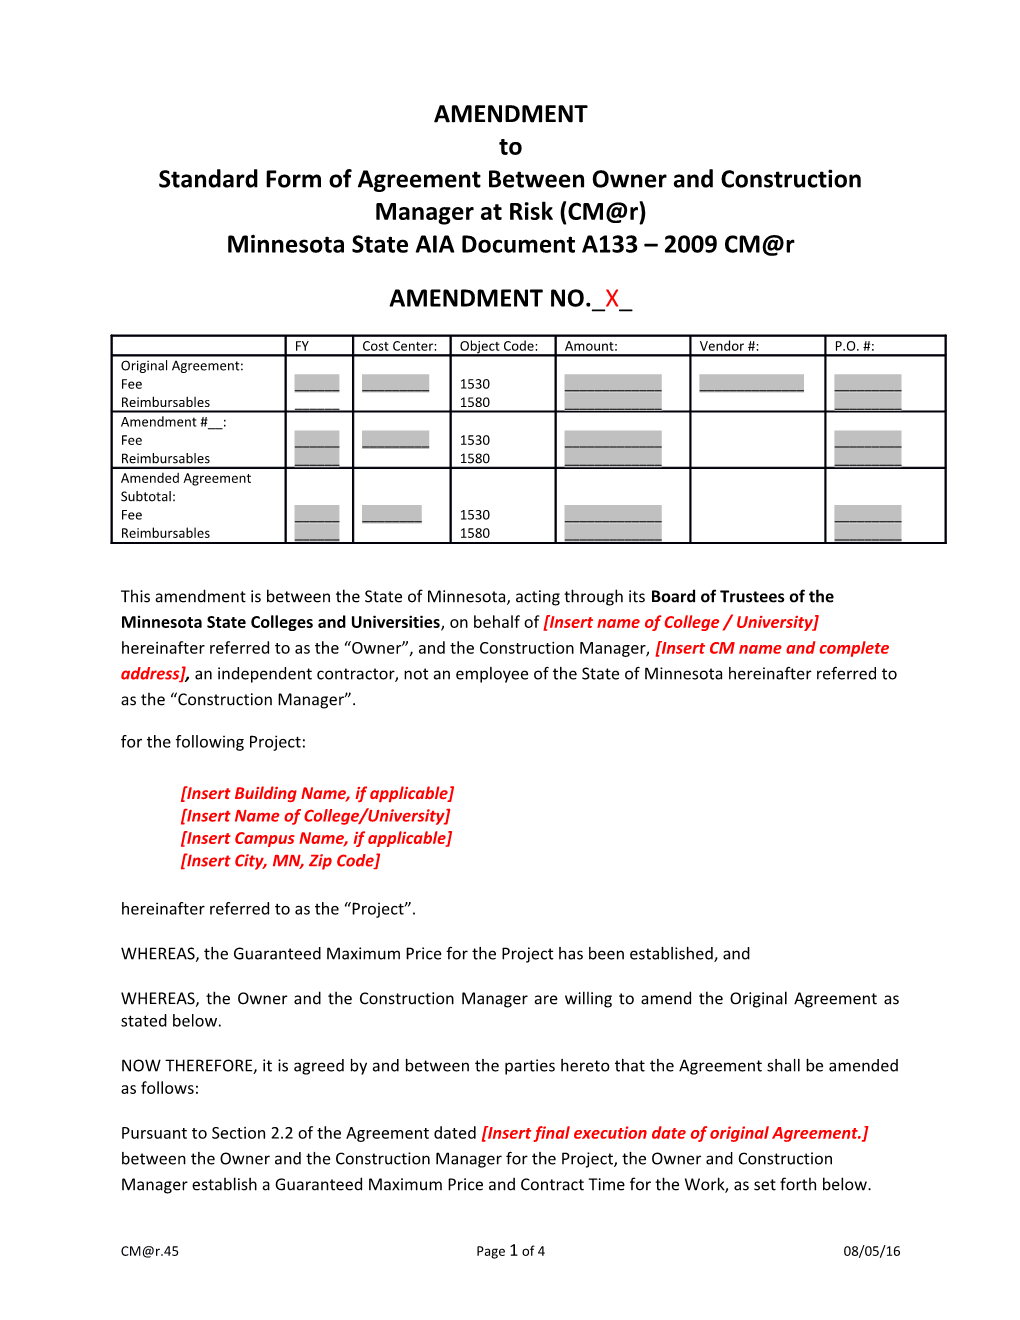 Standard Form of Agreement Between Owner and Construction Manager at Risk (CM R)